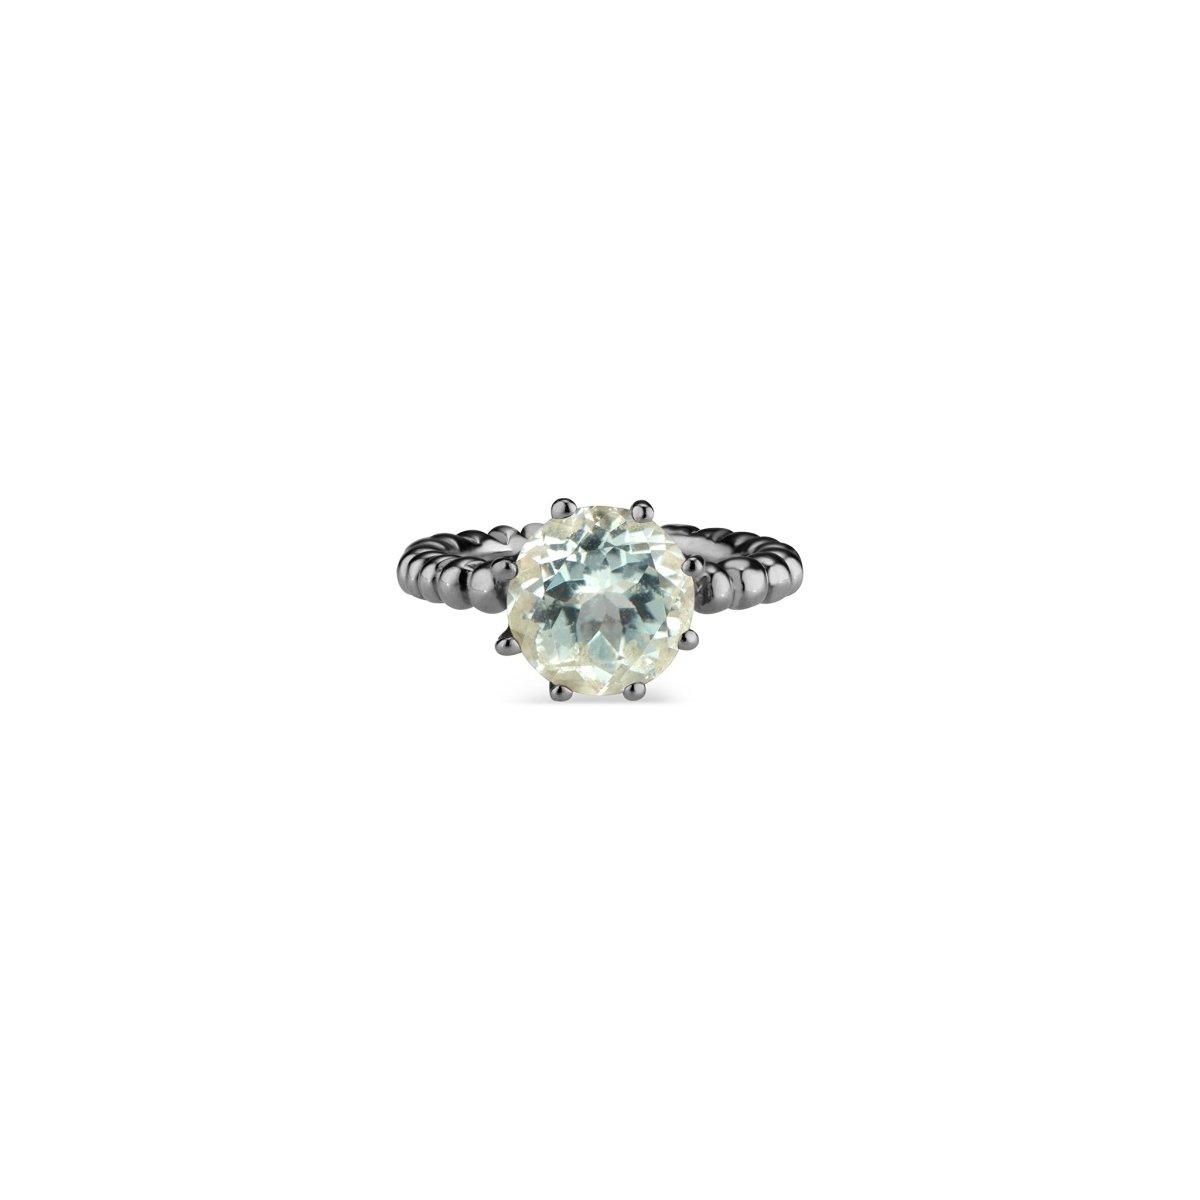 Blue Topaz Crown Ring Sterling Silver - Nataly Aponte